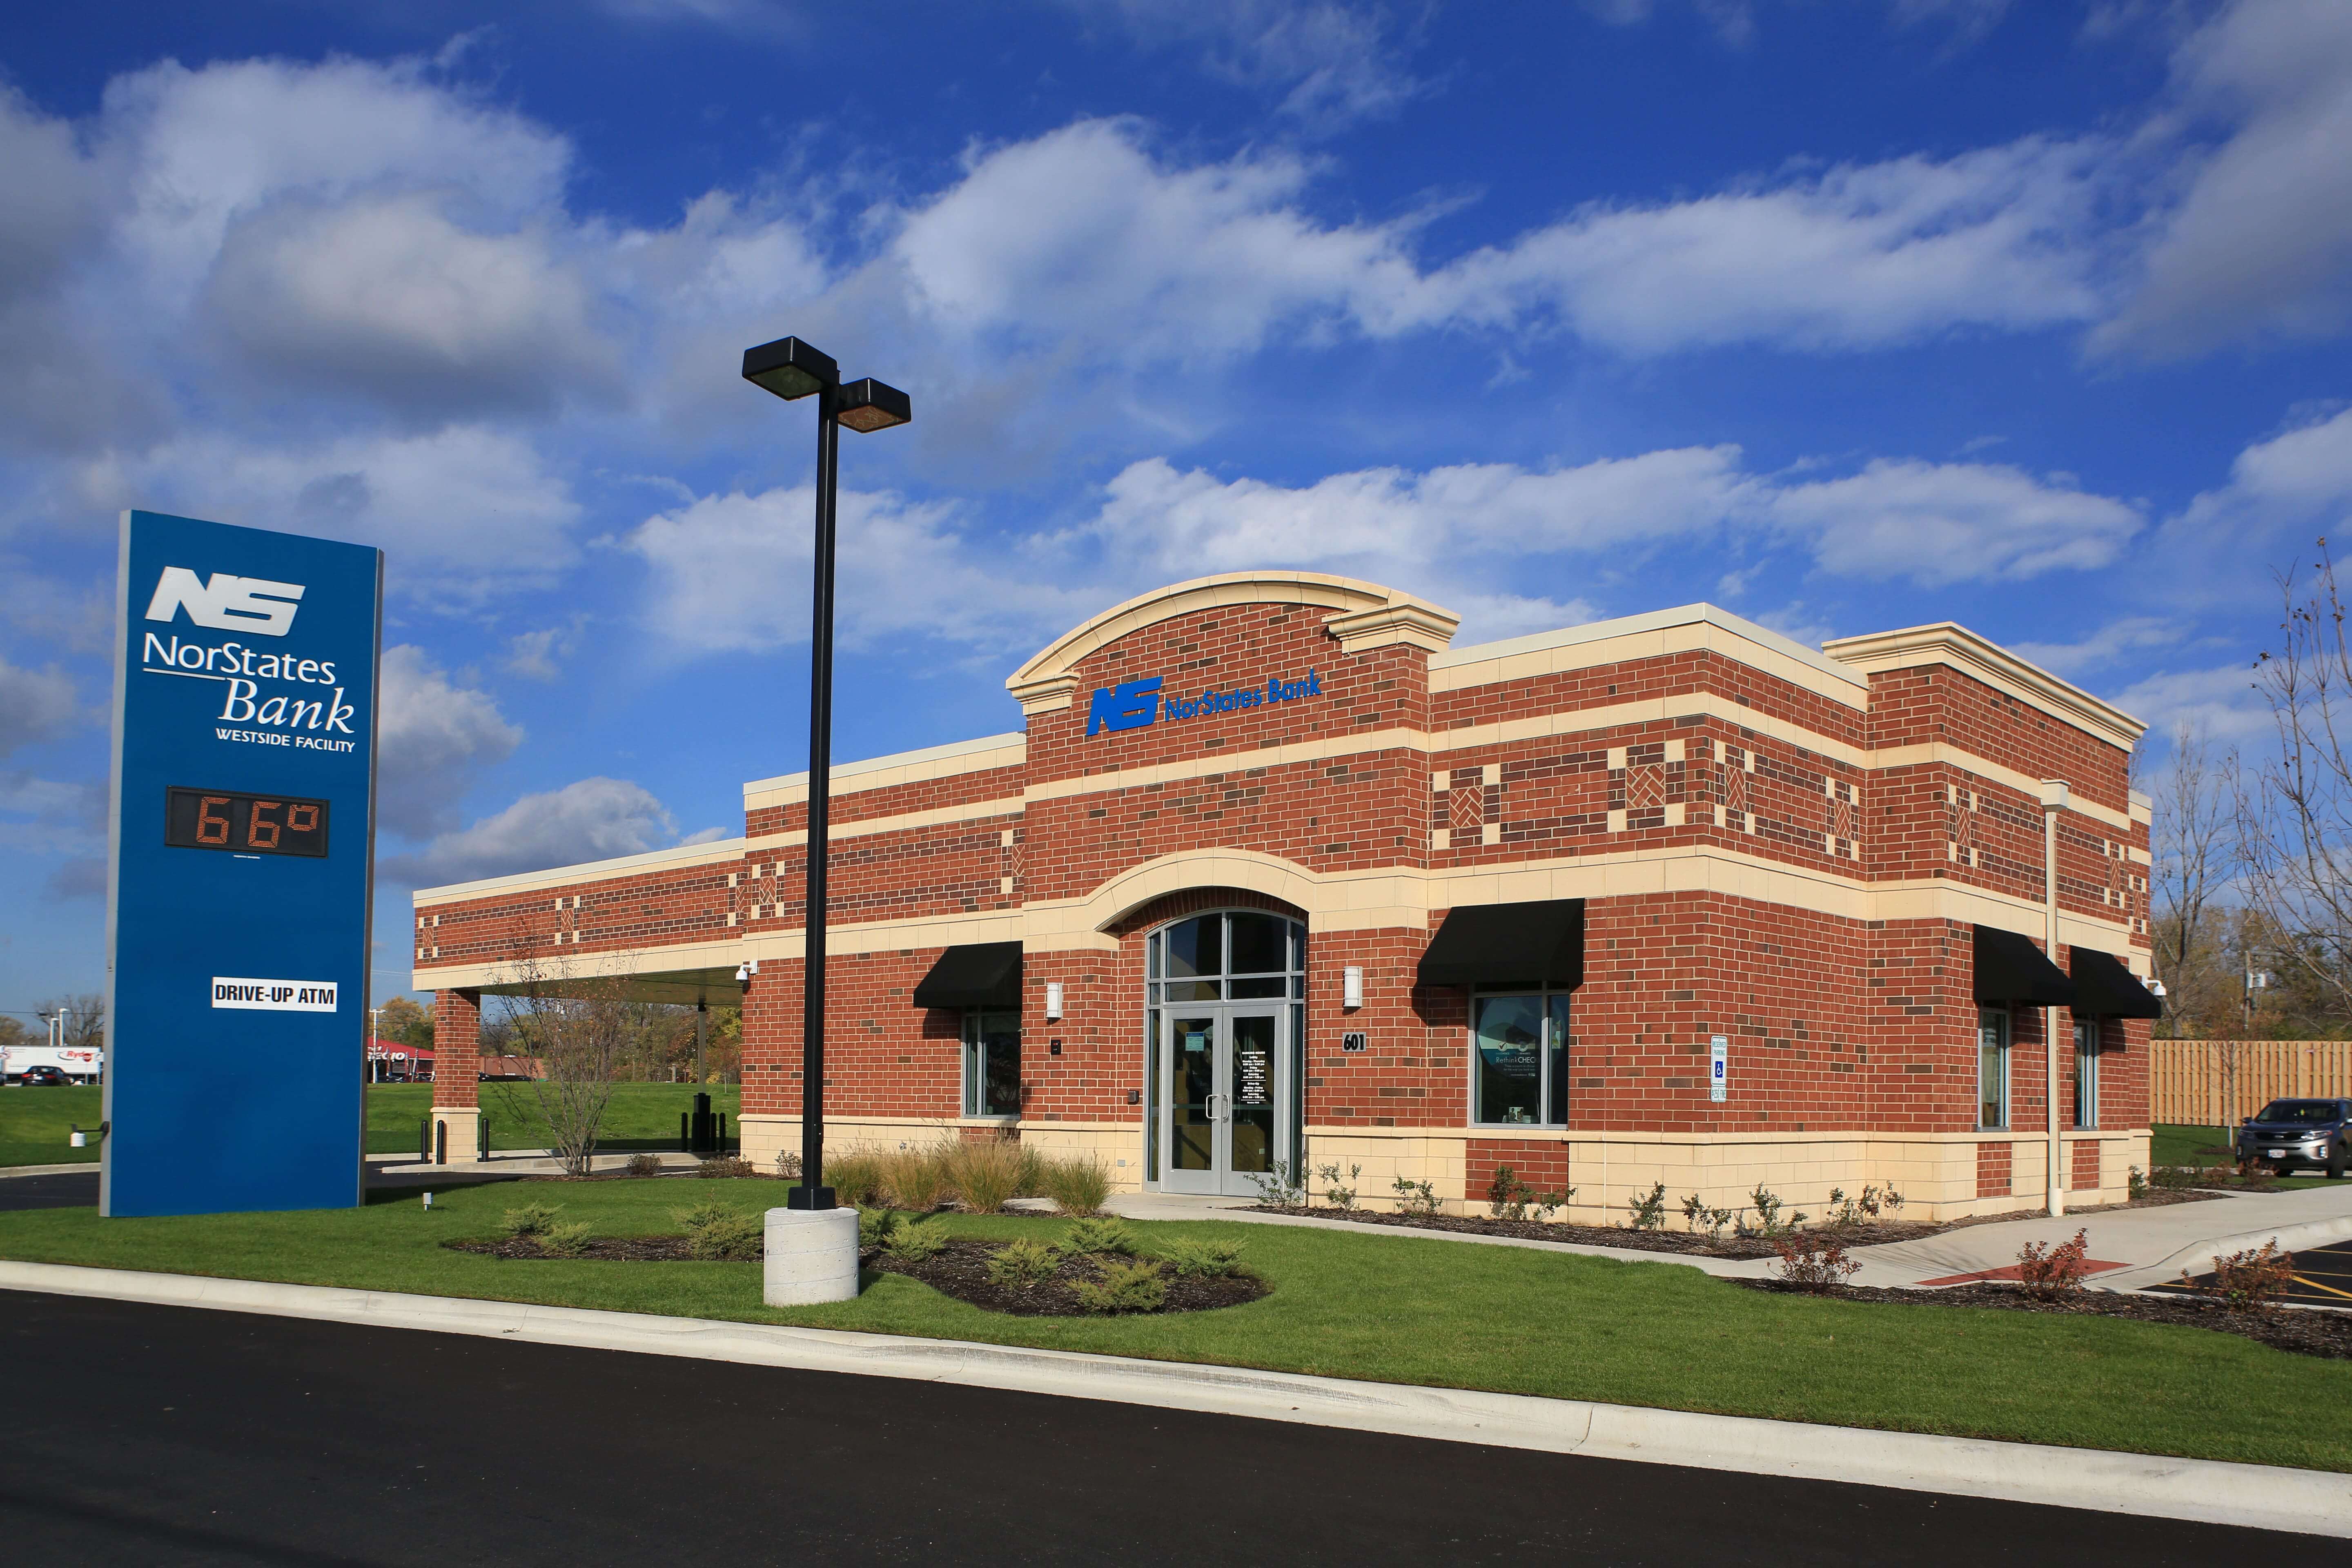 New bank branch in Illinois